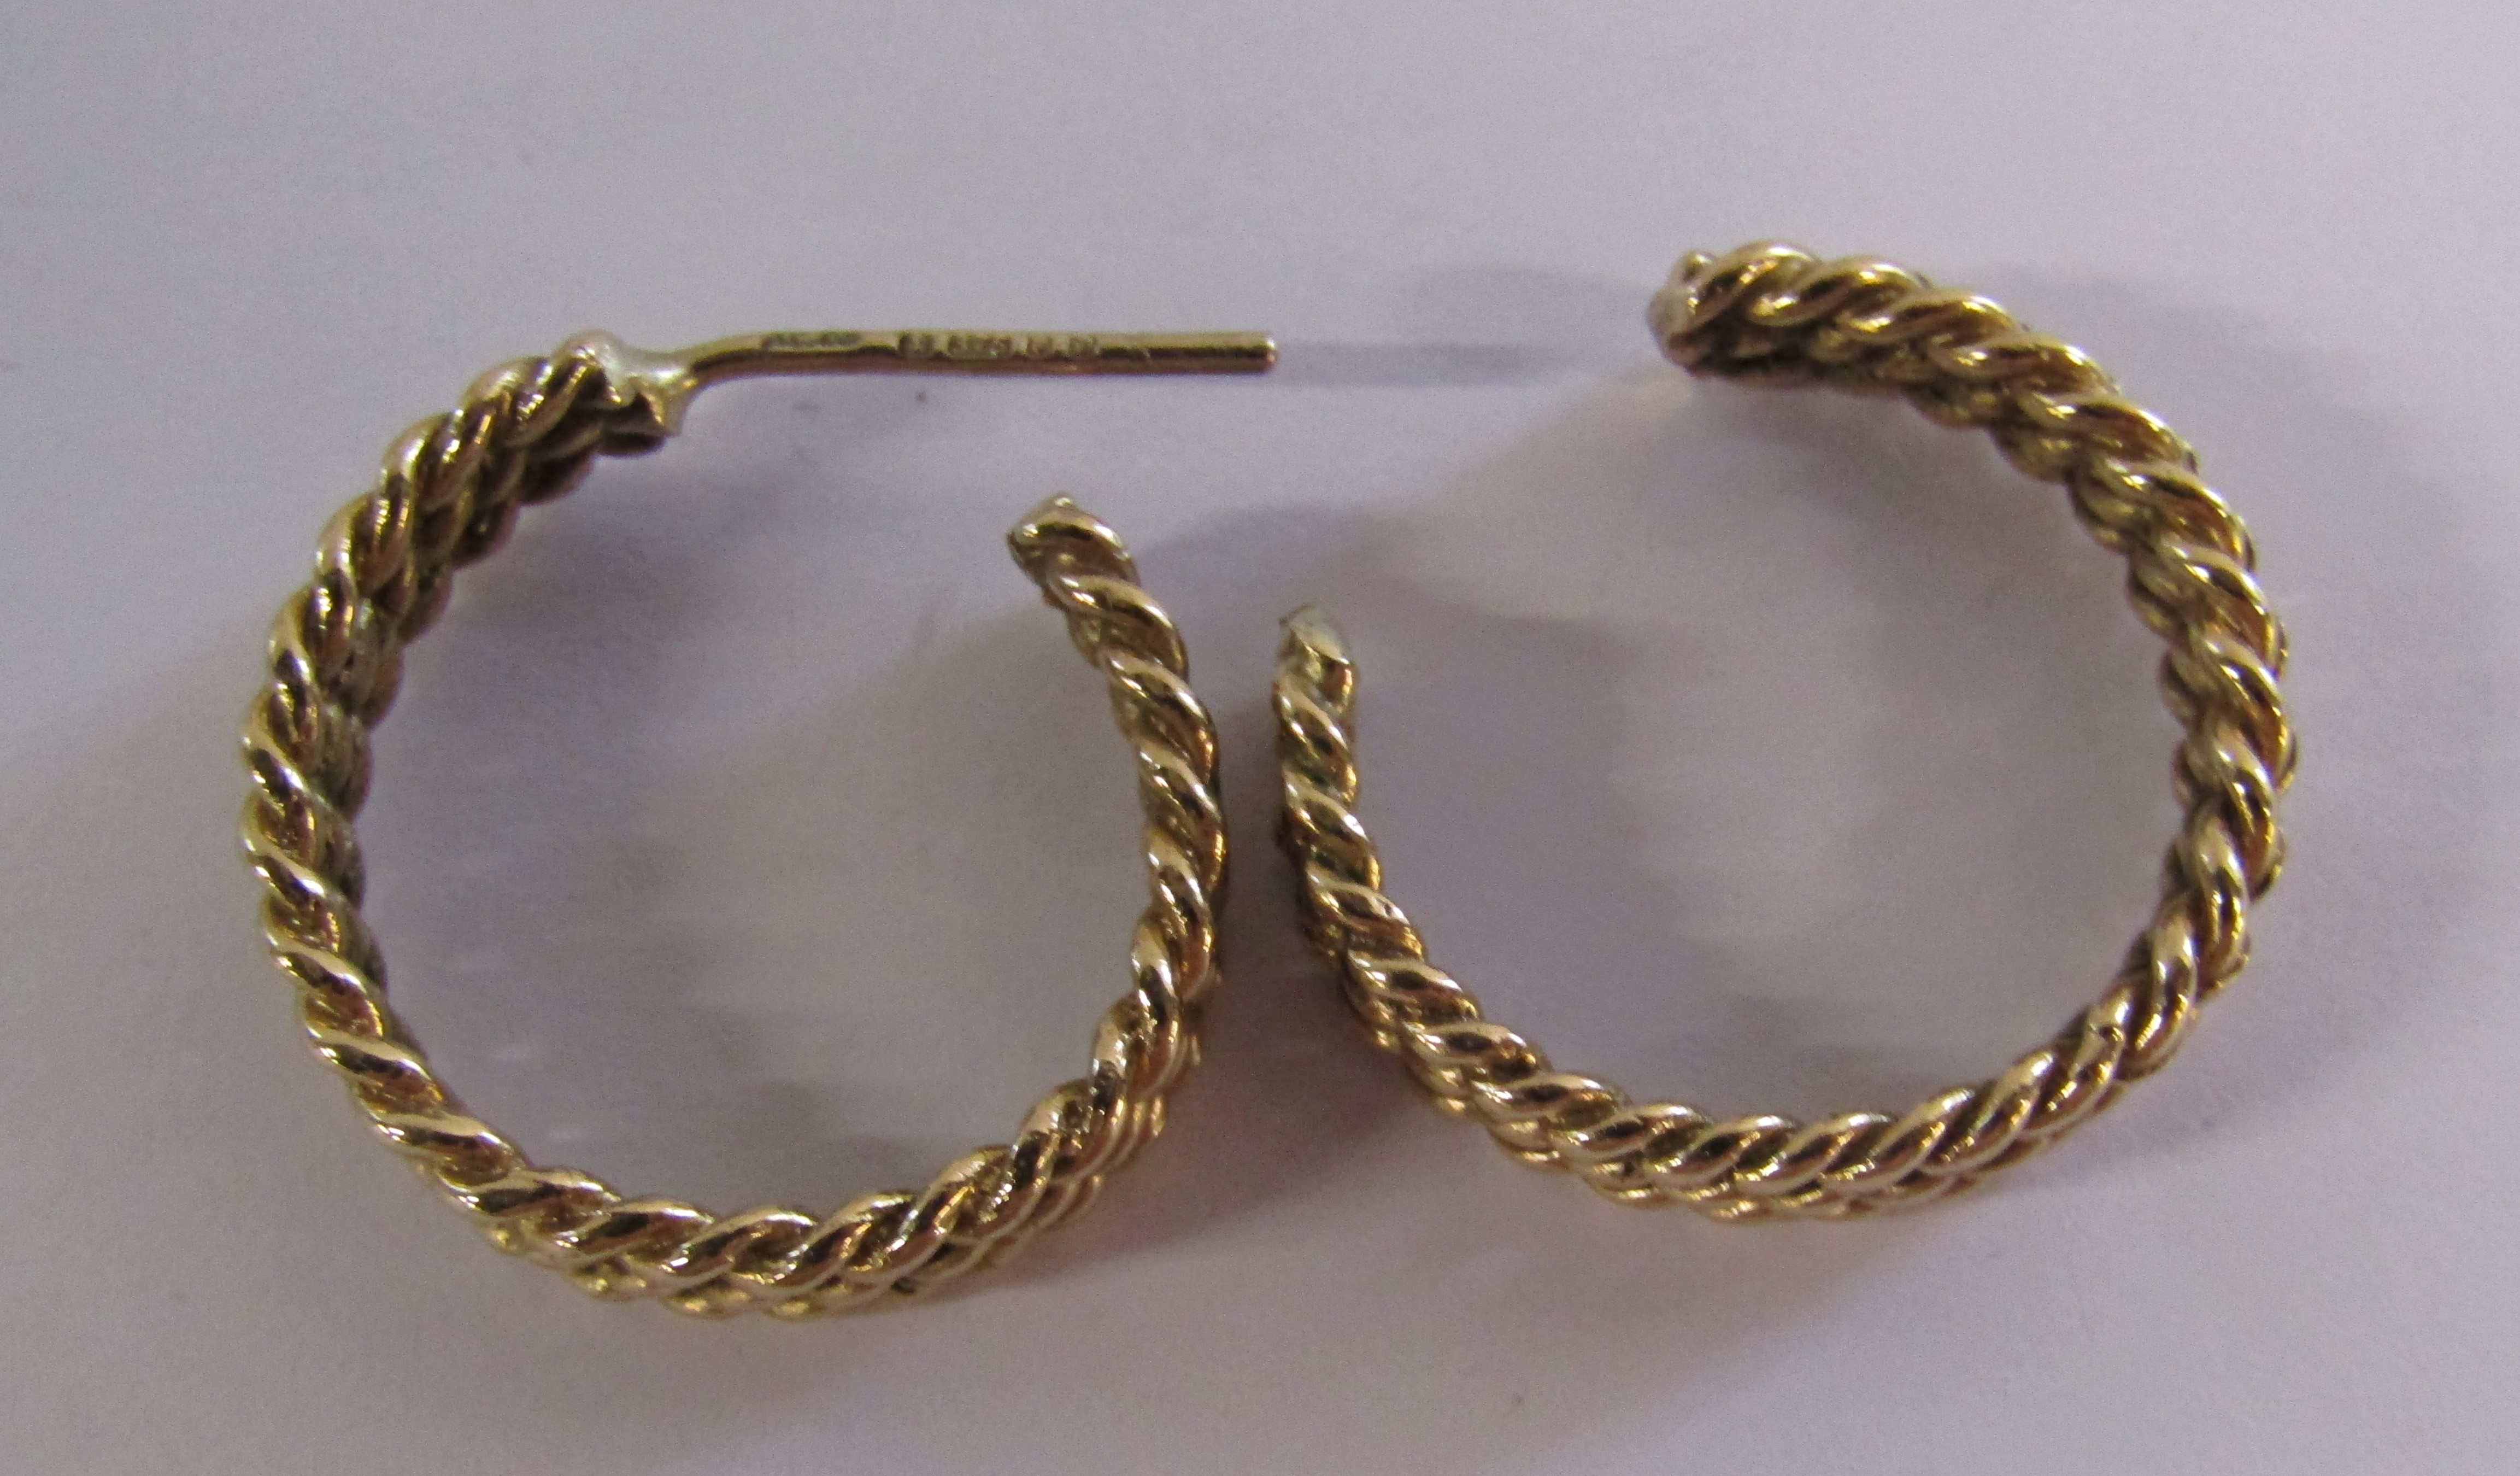 9ct gold earrings - 1 pair with pearl centre, braided hoops (damaged) and two odd earrings - total - Image 2 of 2